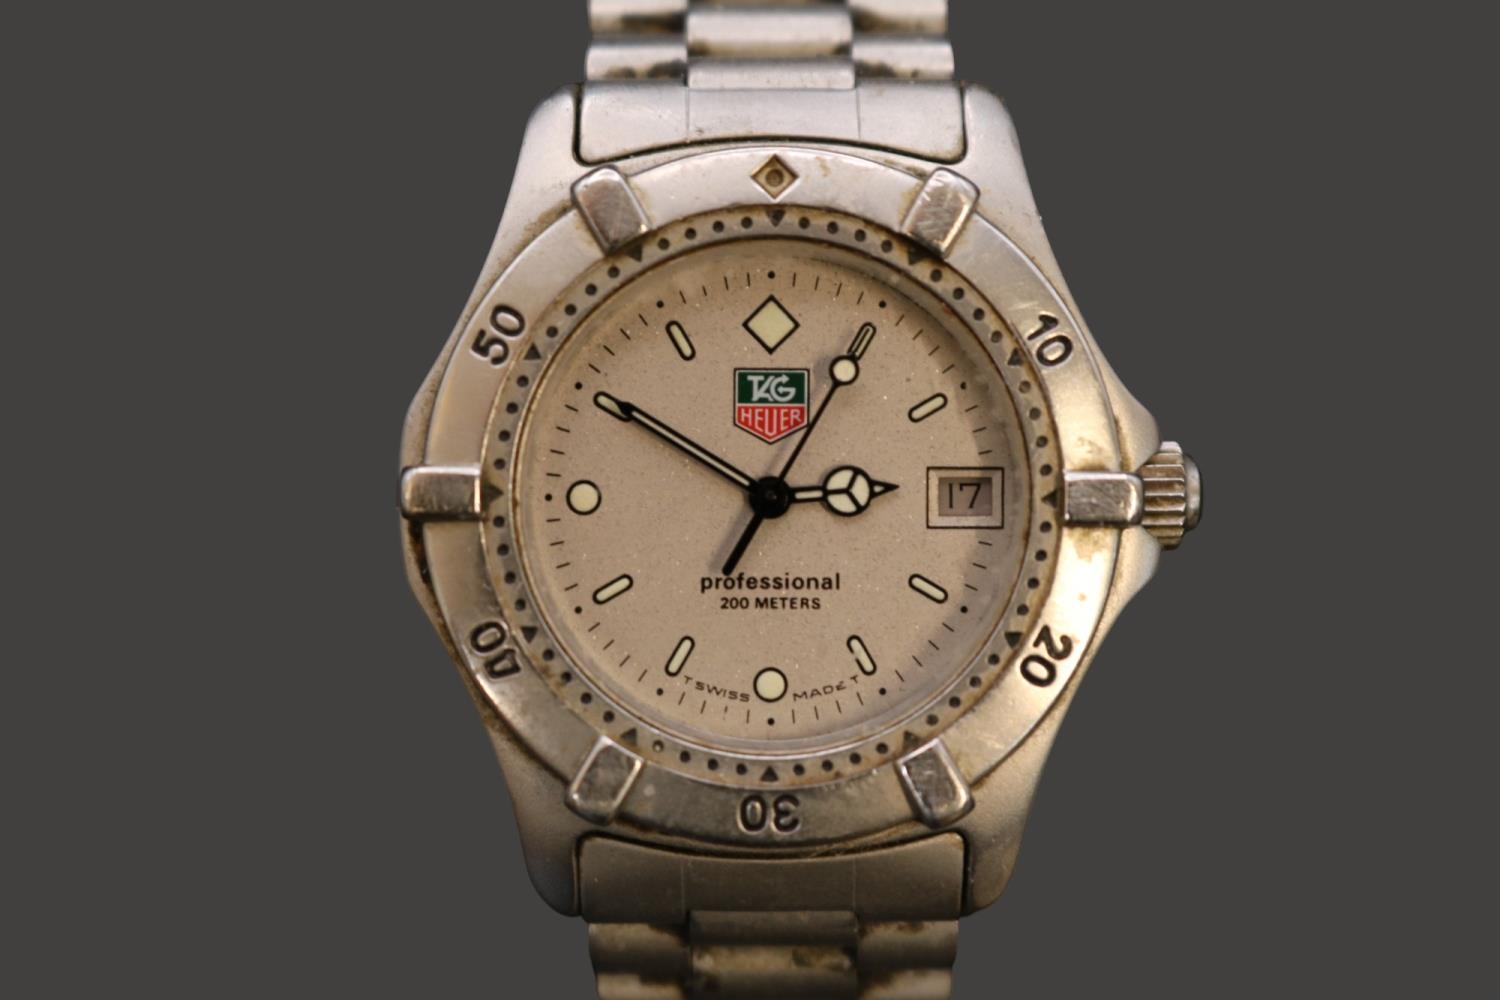 Tag Heuer Professional 200m Swiss quartz watch with date window & Silver coloured dial. 36mm case